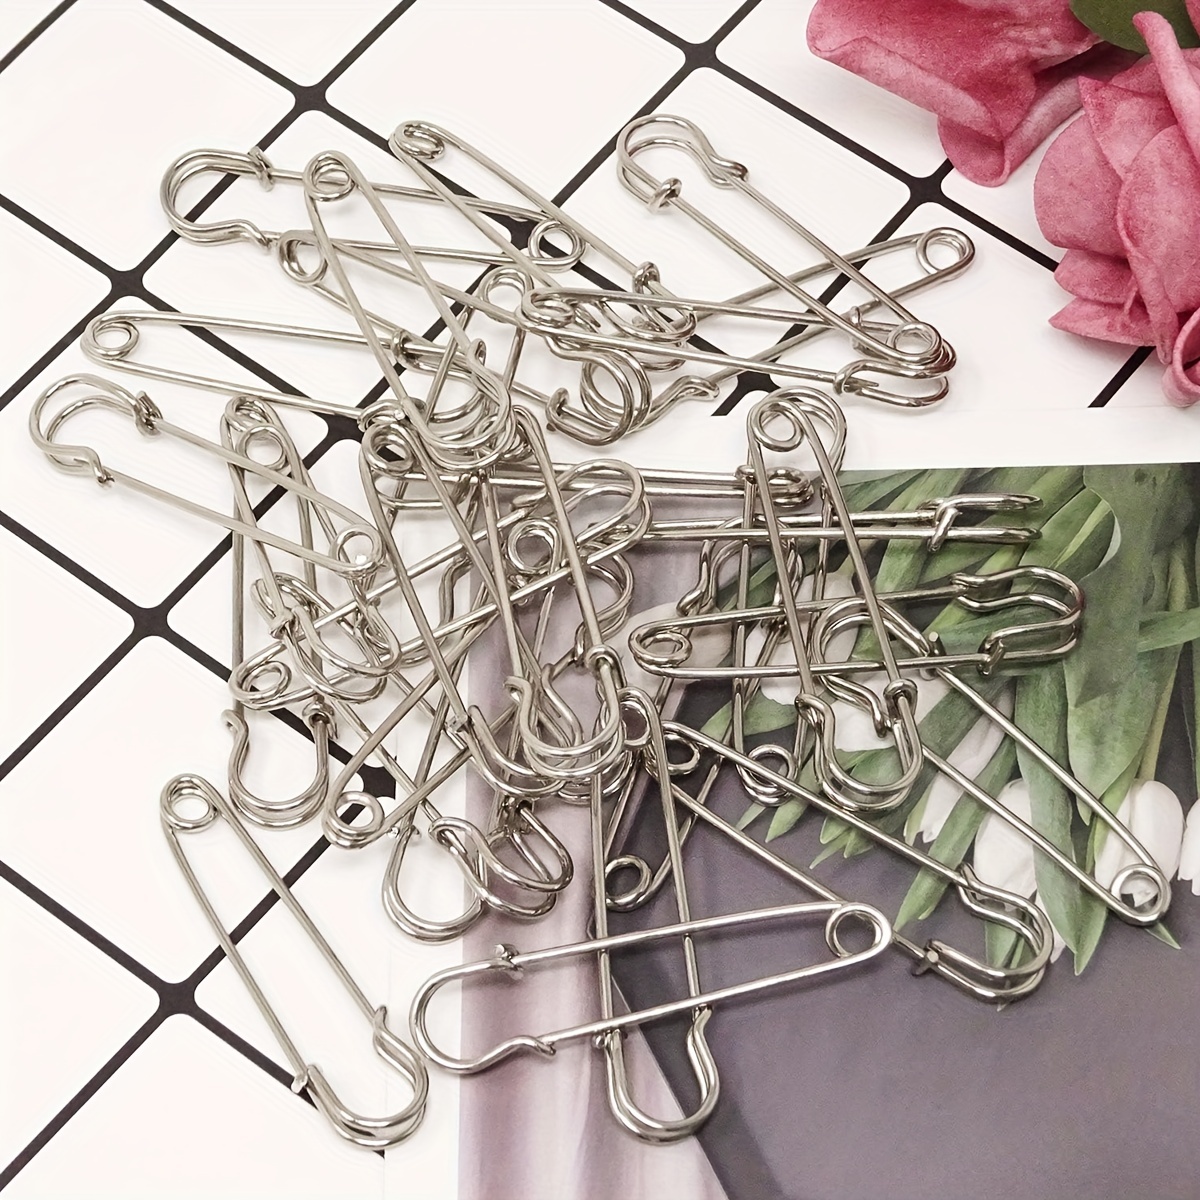 12pcs/set Large Heavy Duty Stainless Steel Big Jumbo Safety Pin Blanket  Crafting for Blankets Crafts Leather Wool Canvas - AliExpress